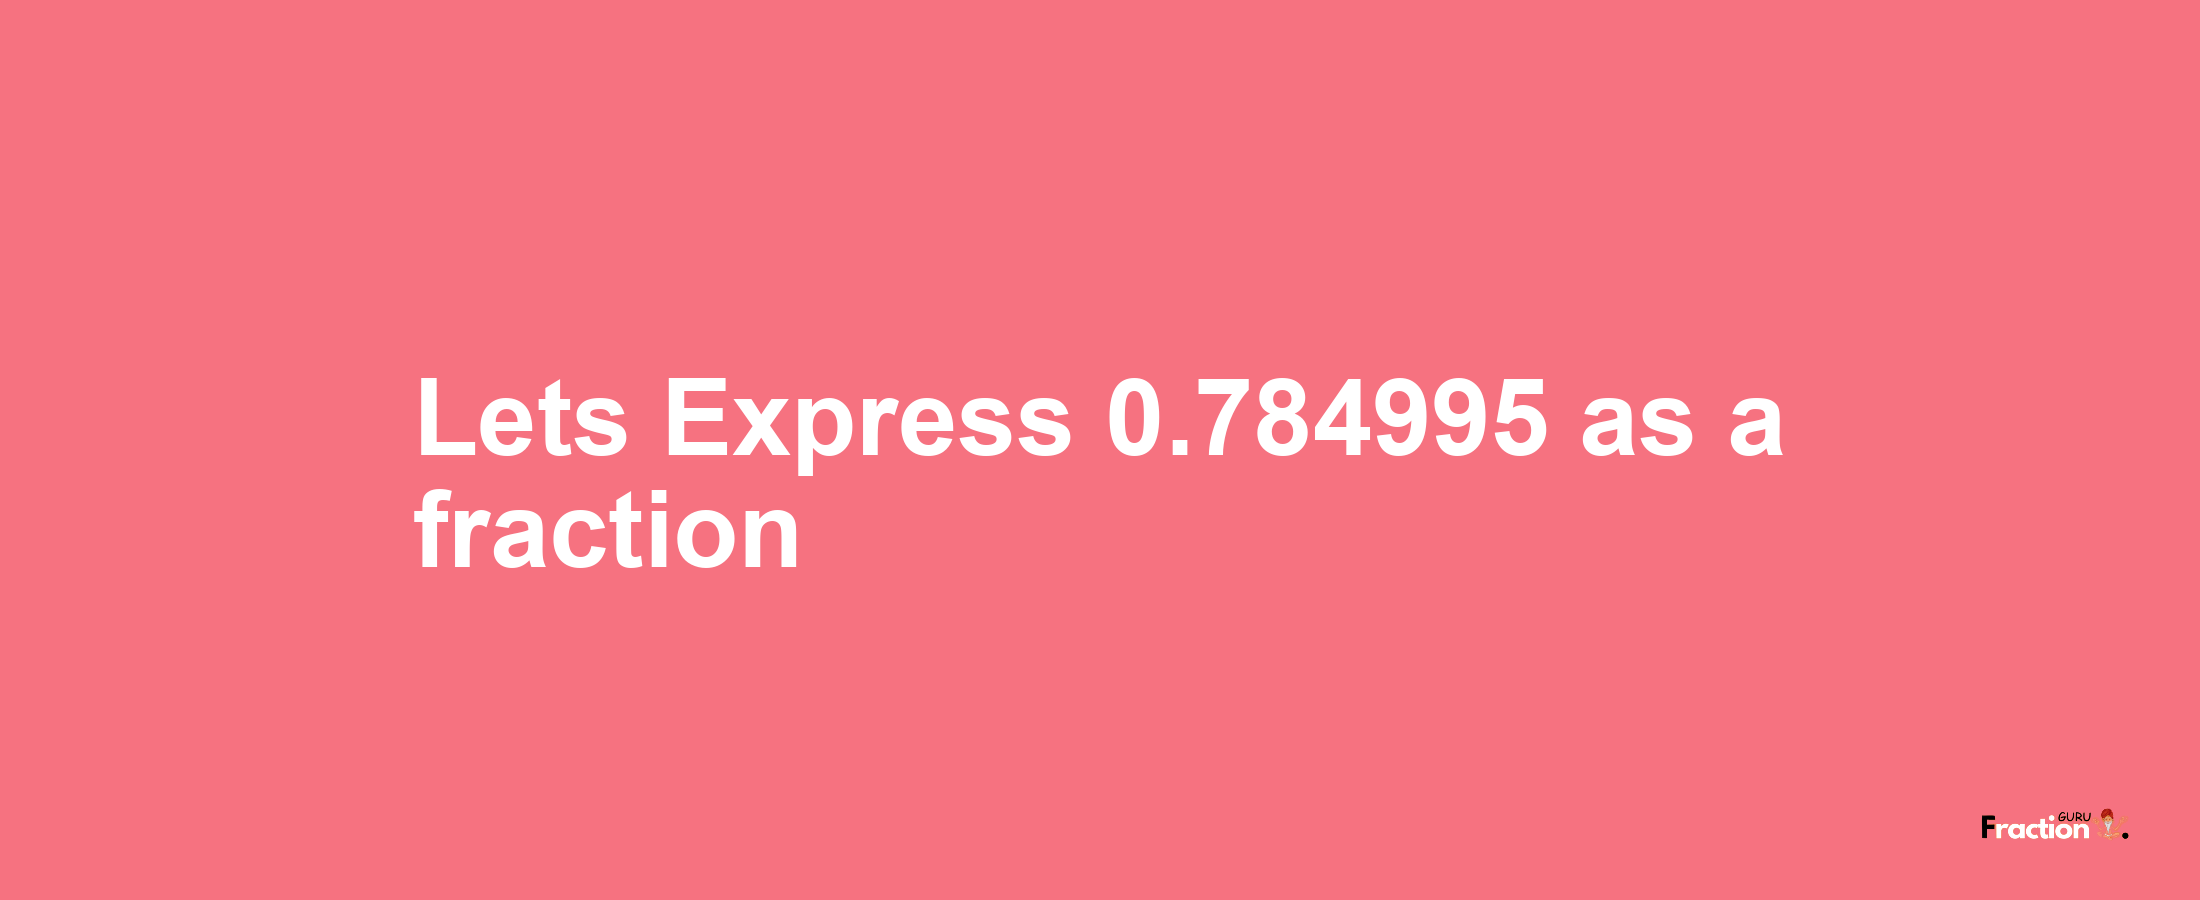 Lets Express 0.784995 as afraction